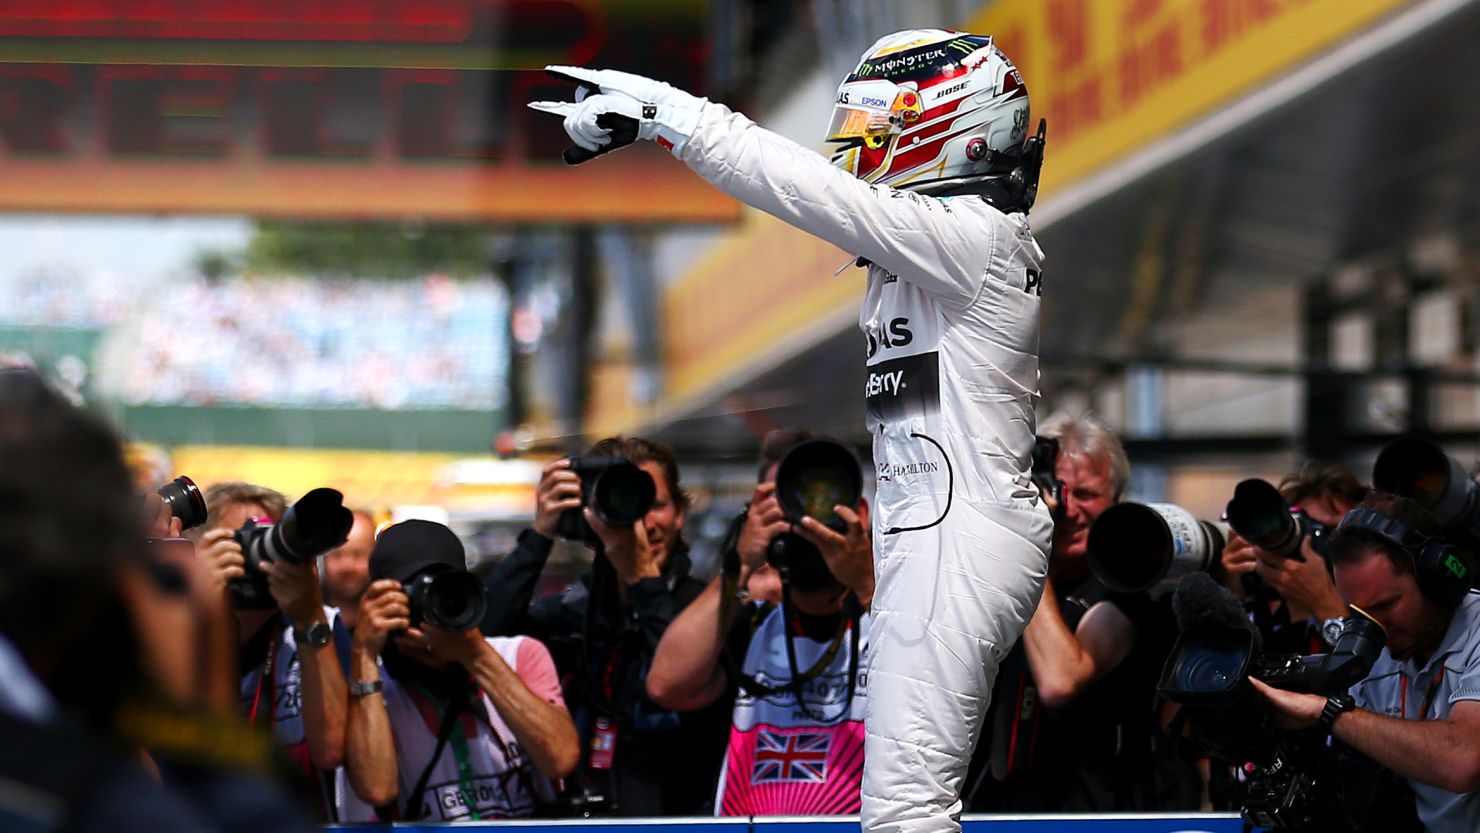 Lewis Hamilton celebrates in parc ferme after claiming pole at the British Grand Prix at Silverstone.